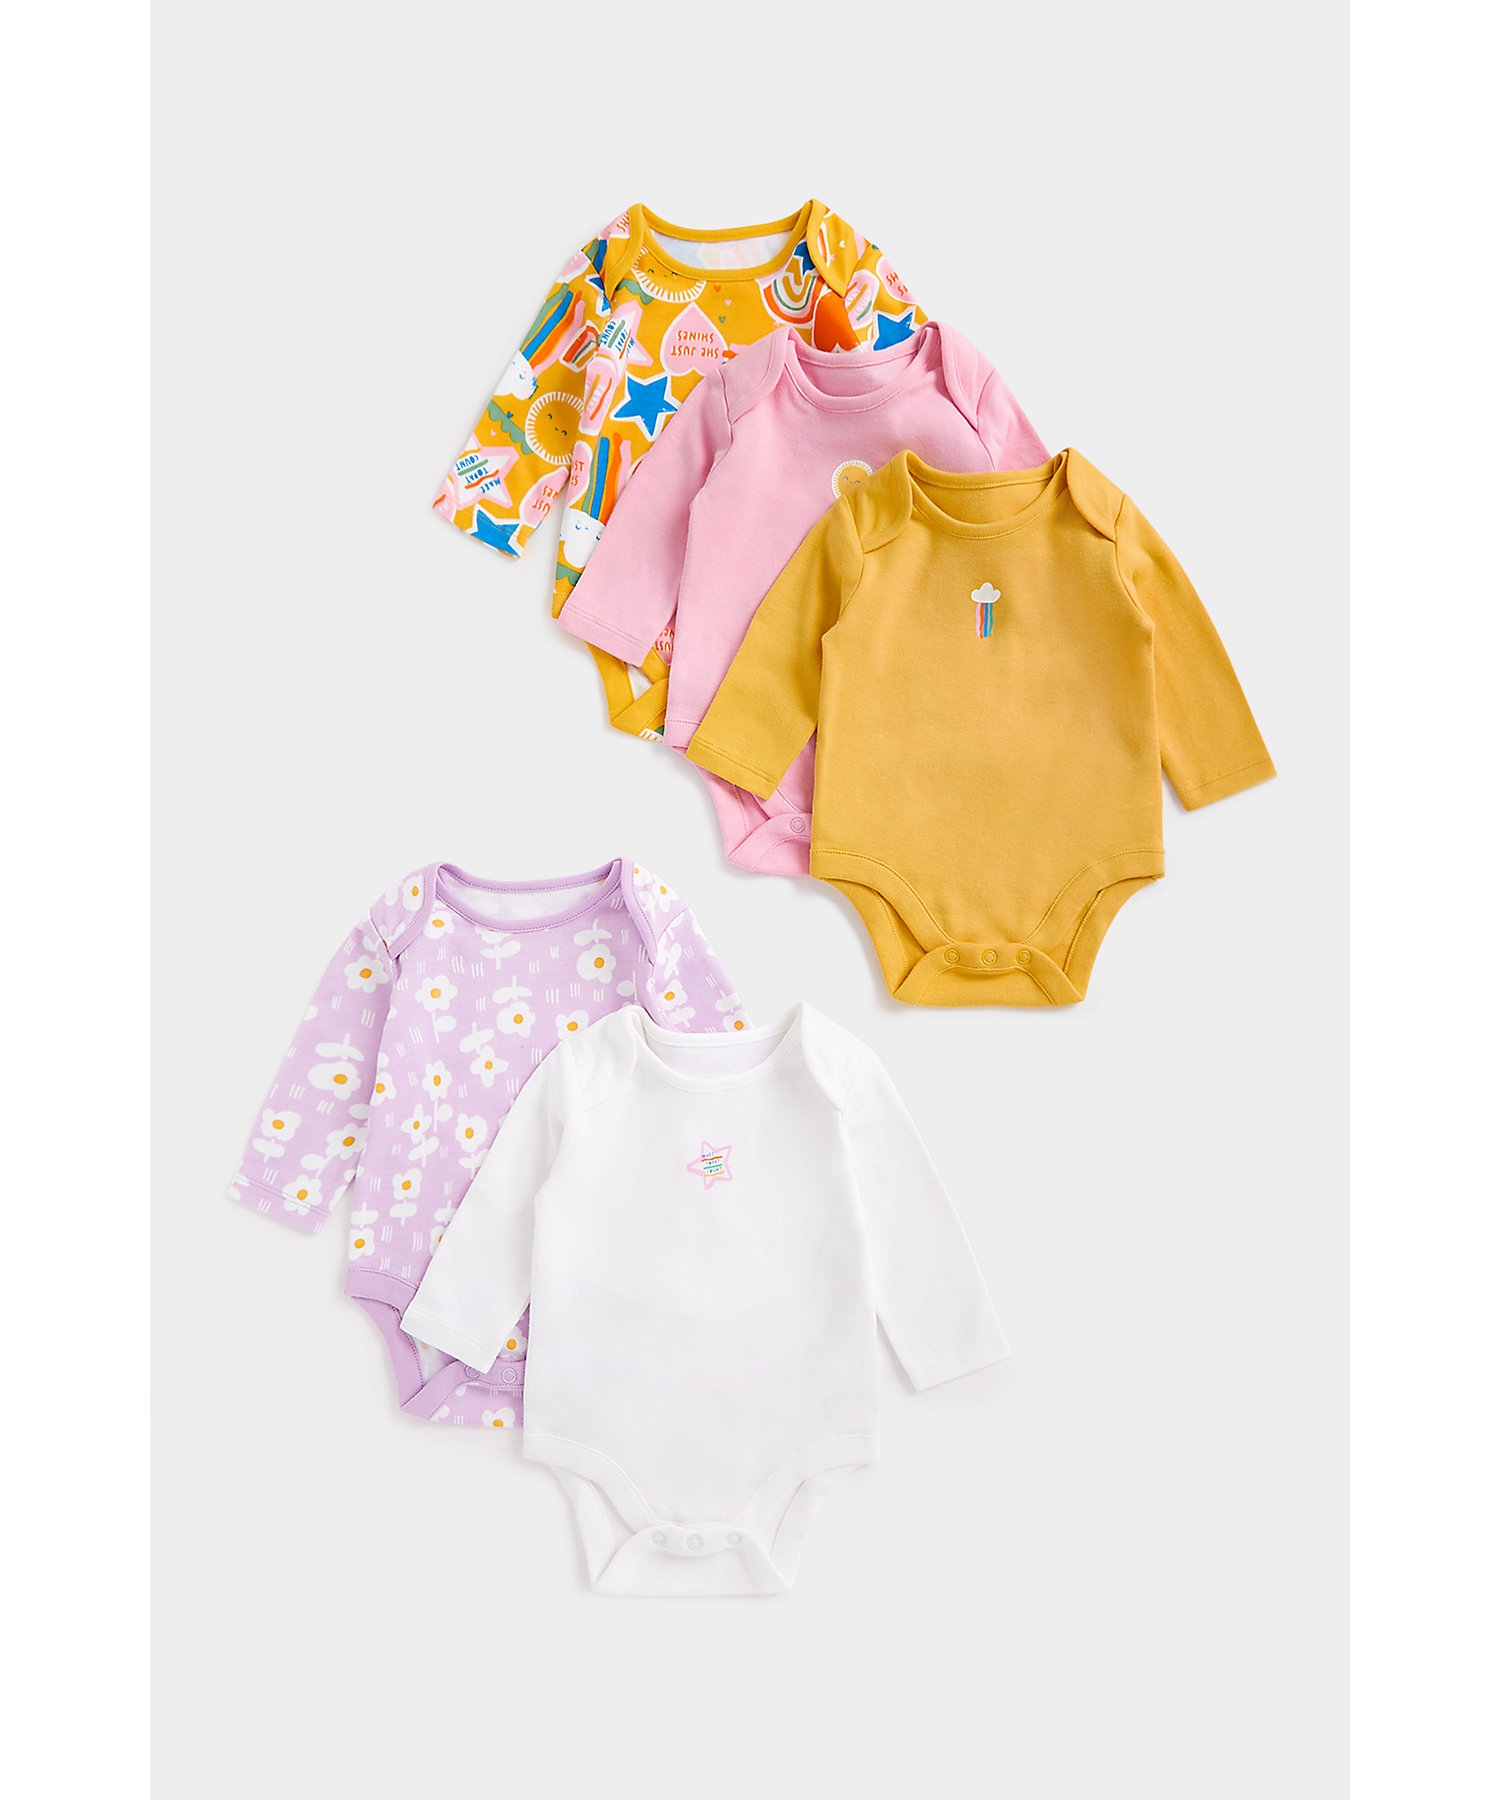 Mothercare | Girls Full Sleeves Bodysuits Fun Colorful Designs-Multicolor 0